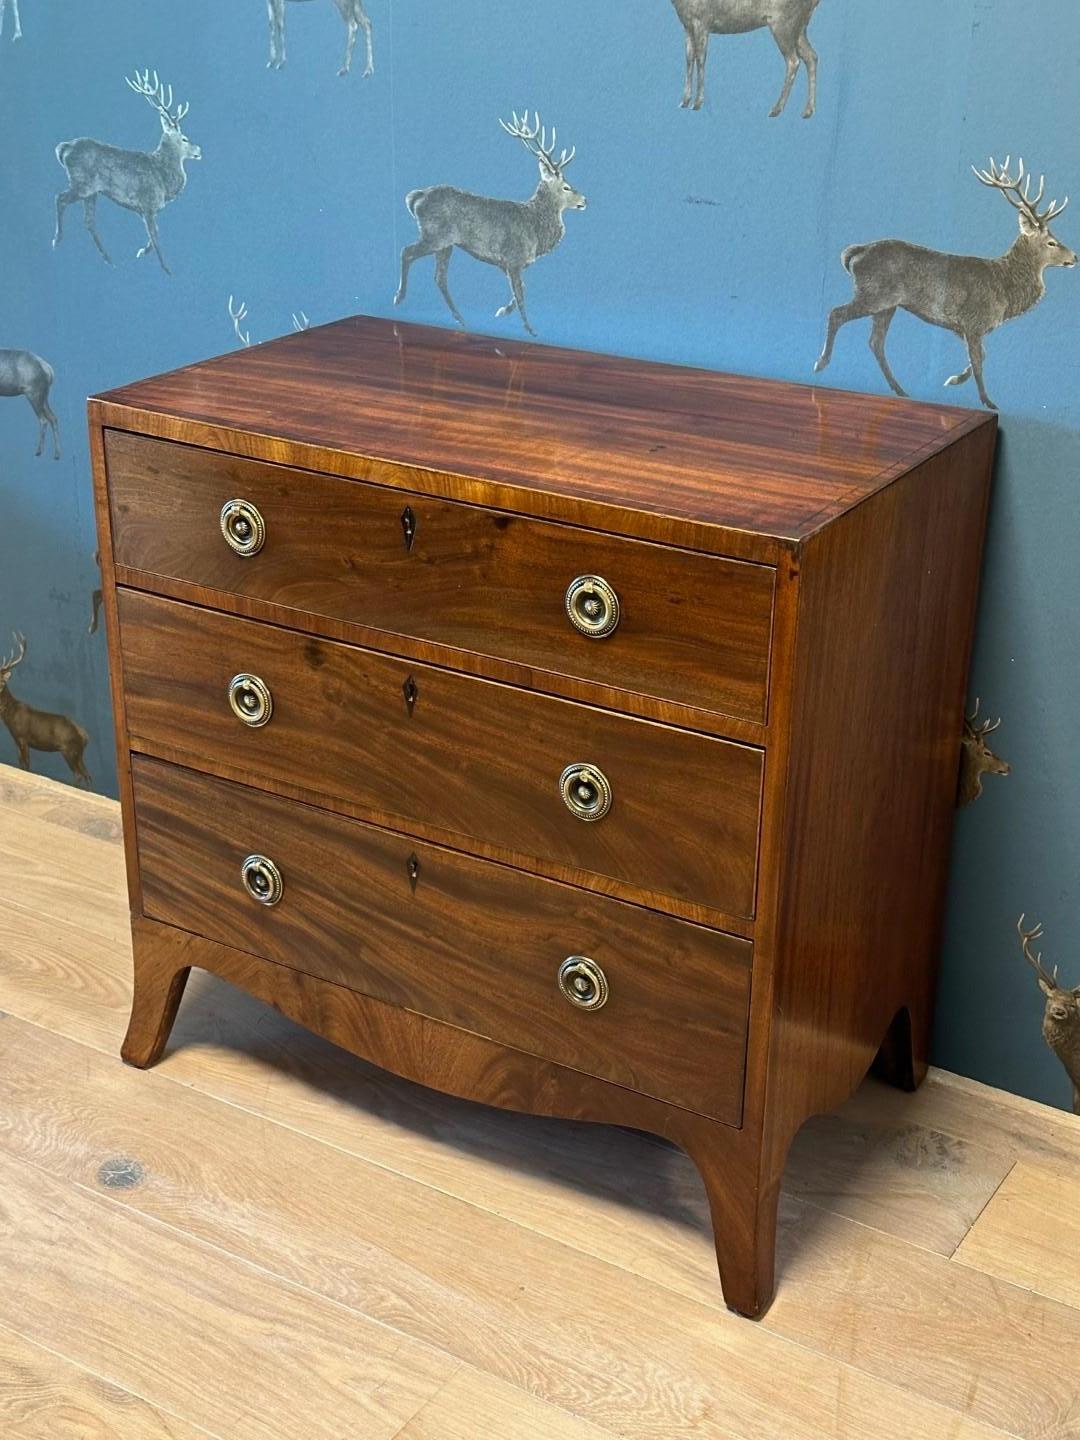 Beautiful small antique mahogany chest of drawers in very good condition. The chest of drawers has a beautiful warm color and pattern of mahogany. The small size makes it extra beautiful and practical.
Origin: England
Period: Approx. 1800
Size: